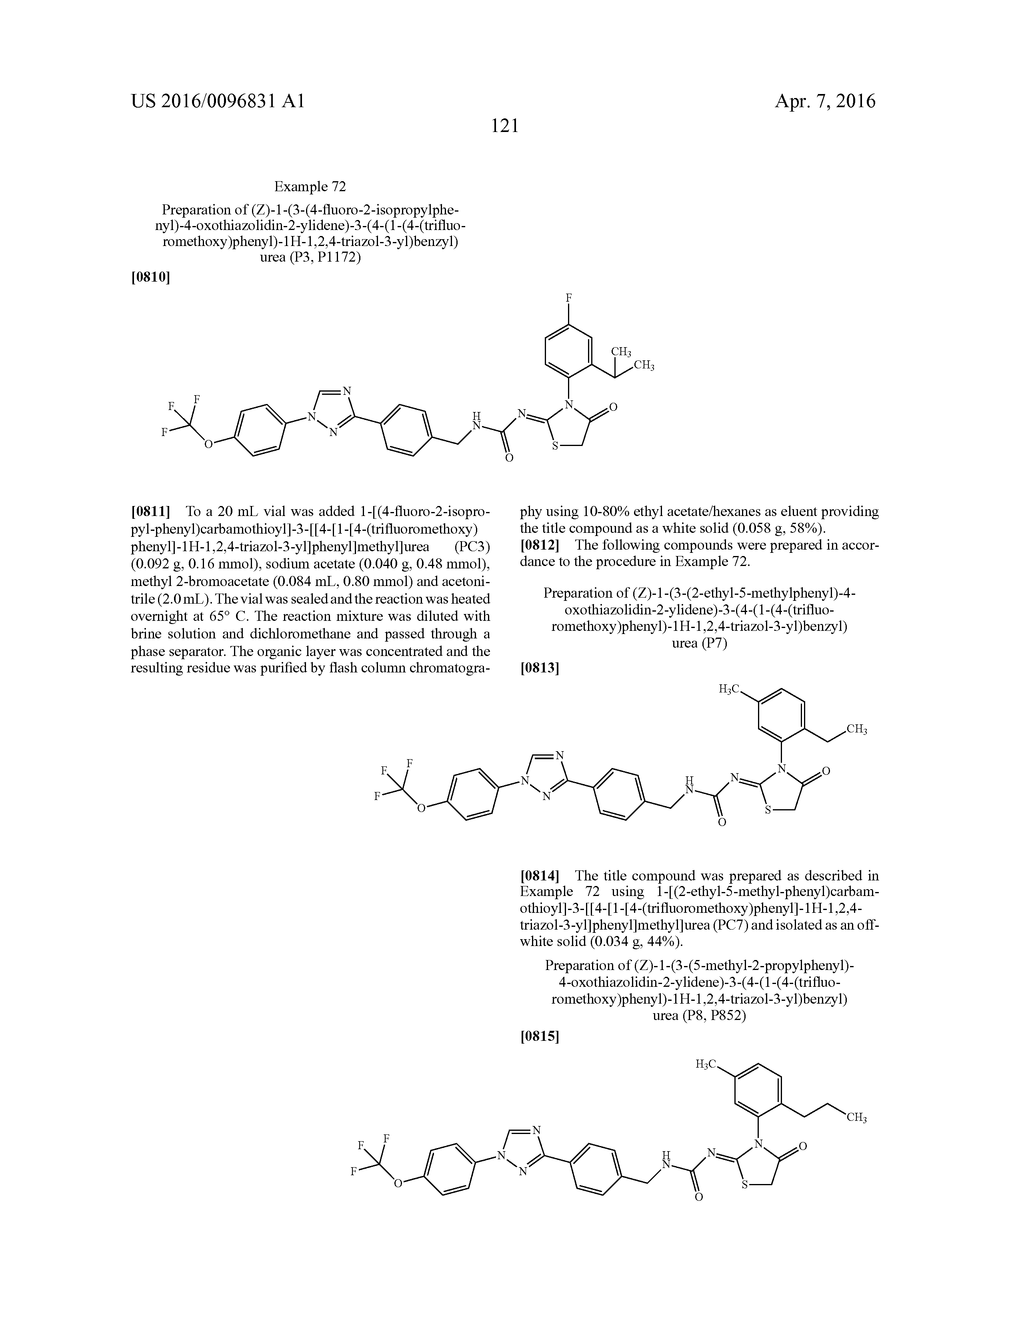 MOLECULES HAVING CERTAIN PESTICIDAL UTILITIES, AND INTERMEDIATES,     COMPOSITIONS, AND PROCESSES RELATED THERETO - diagram, schematic, and image 122